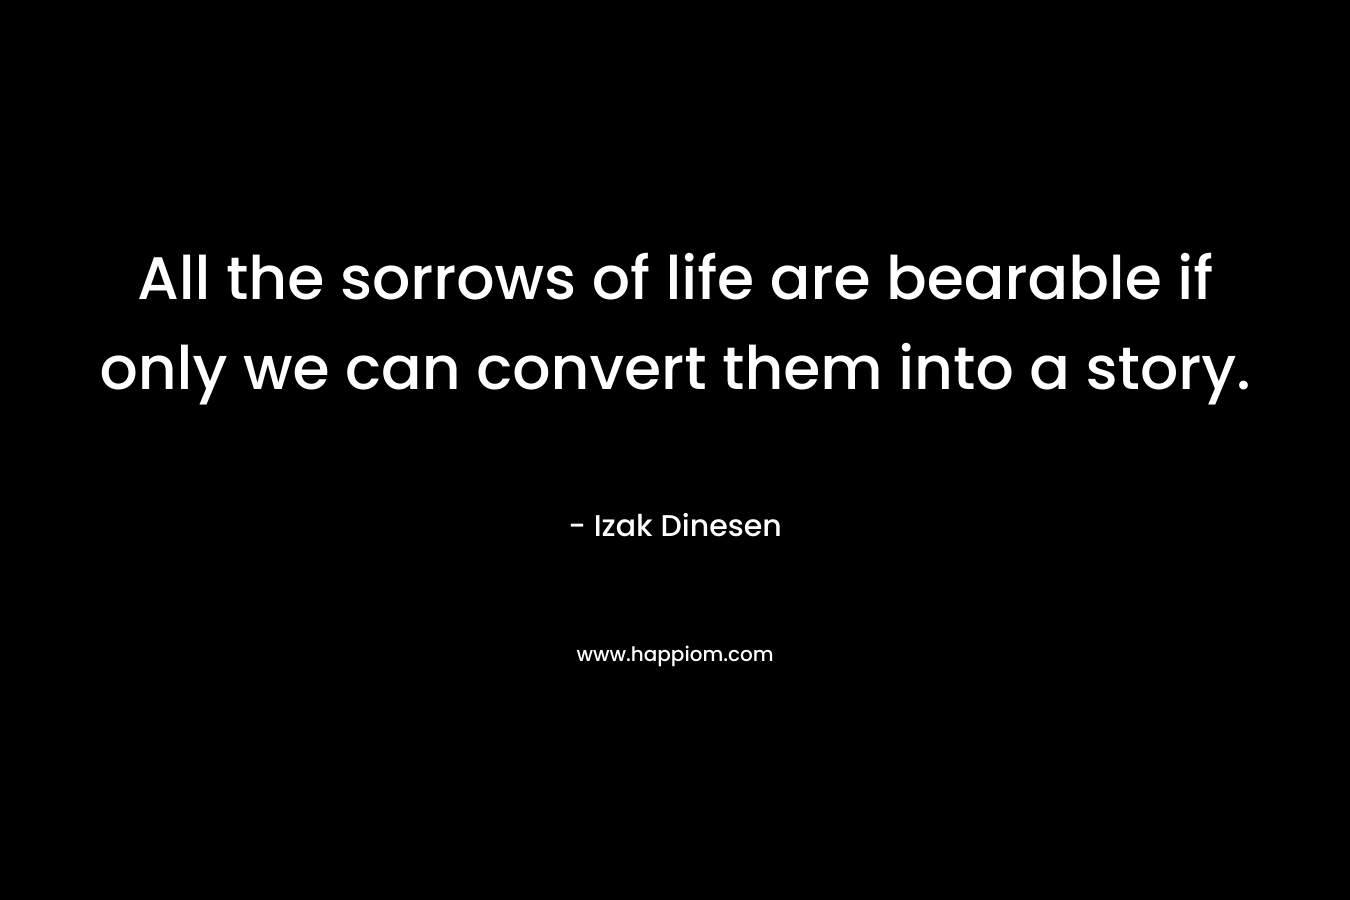 All the sorrows of life are bearable if only we can convert them into a story. – Izak Dinesen